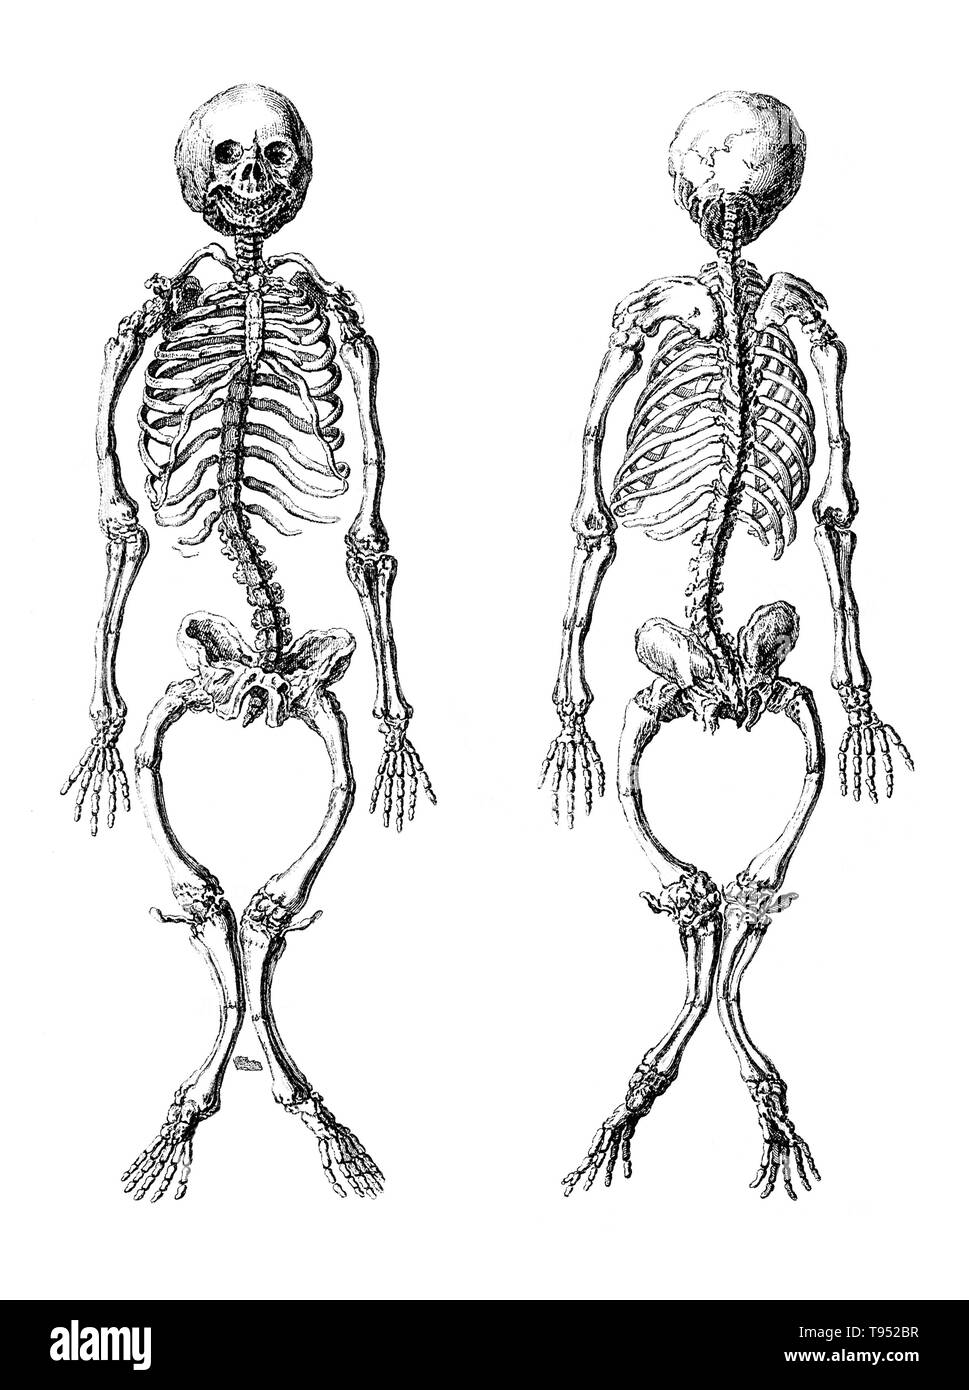 A rachitic skeleton, measuring two feet two inches in length, seen from the front and the back. Rickets is among the most frequent childhood diseases in many developing countries. The predominant cause is a vitamin D deficiency, but lack of adequate calcium in the diet may also lead to rickets. A sufficient amount of ultraviolet B light in sunlight each day and adequate supplies of calcium and phosphorus in the diet can prevent rickets. Stock Photo